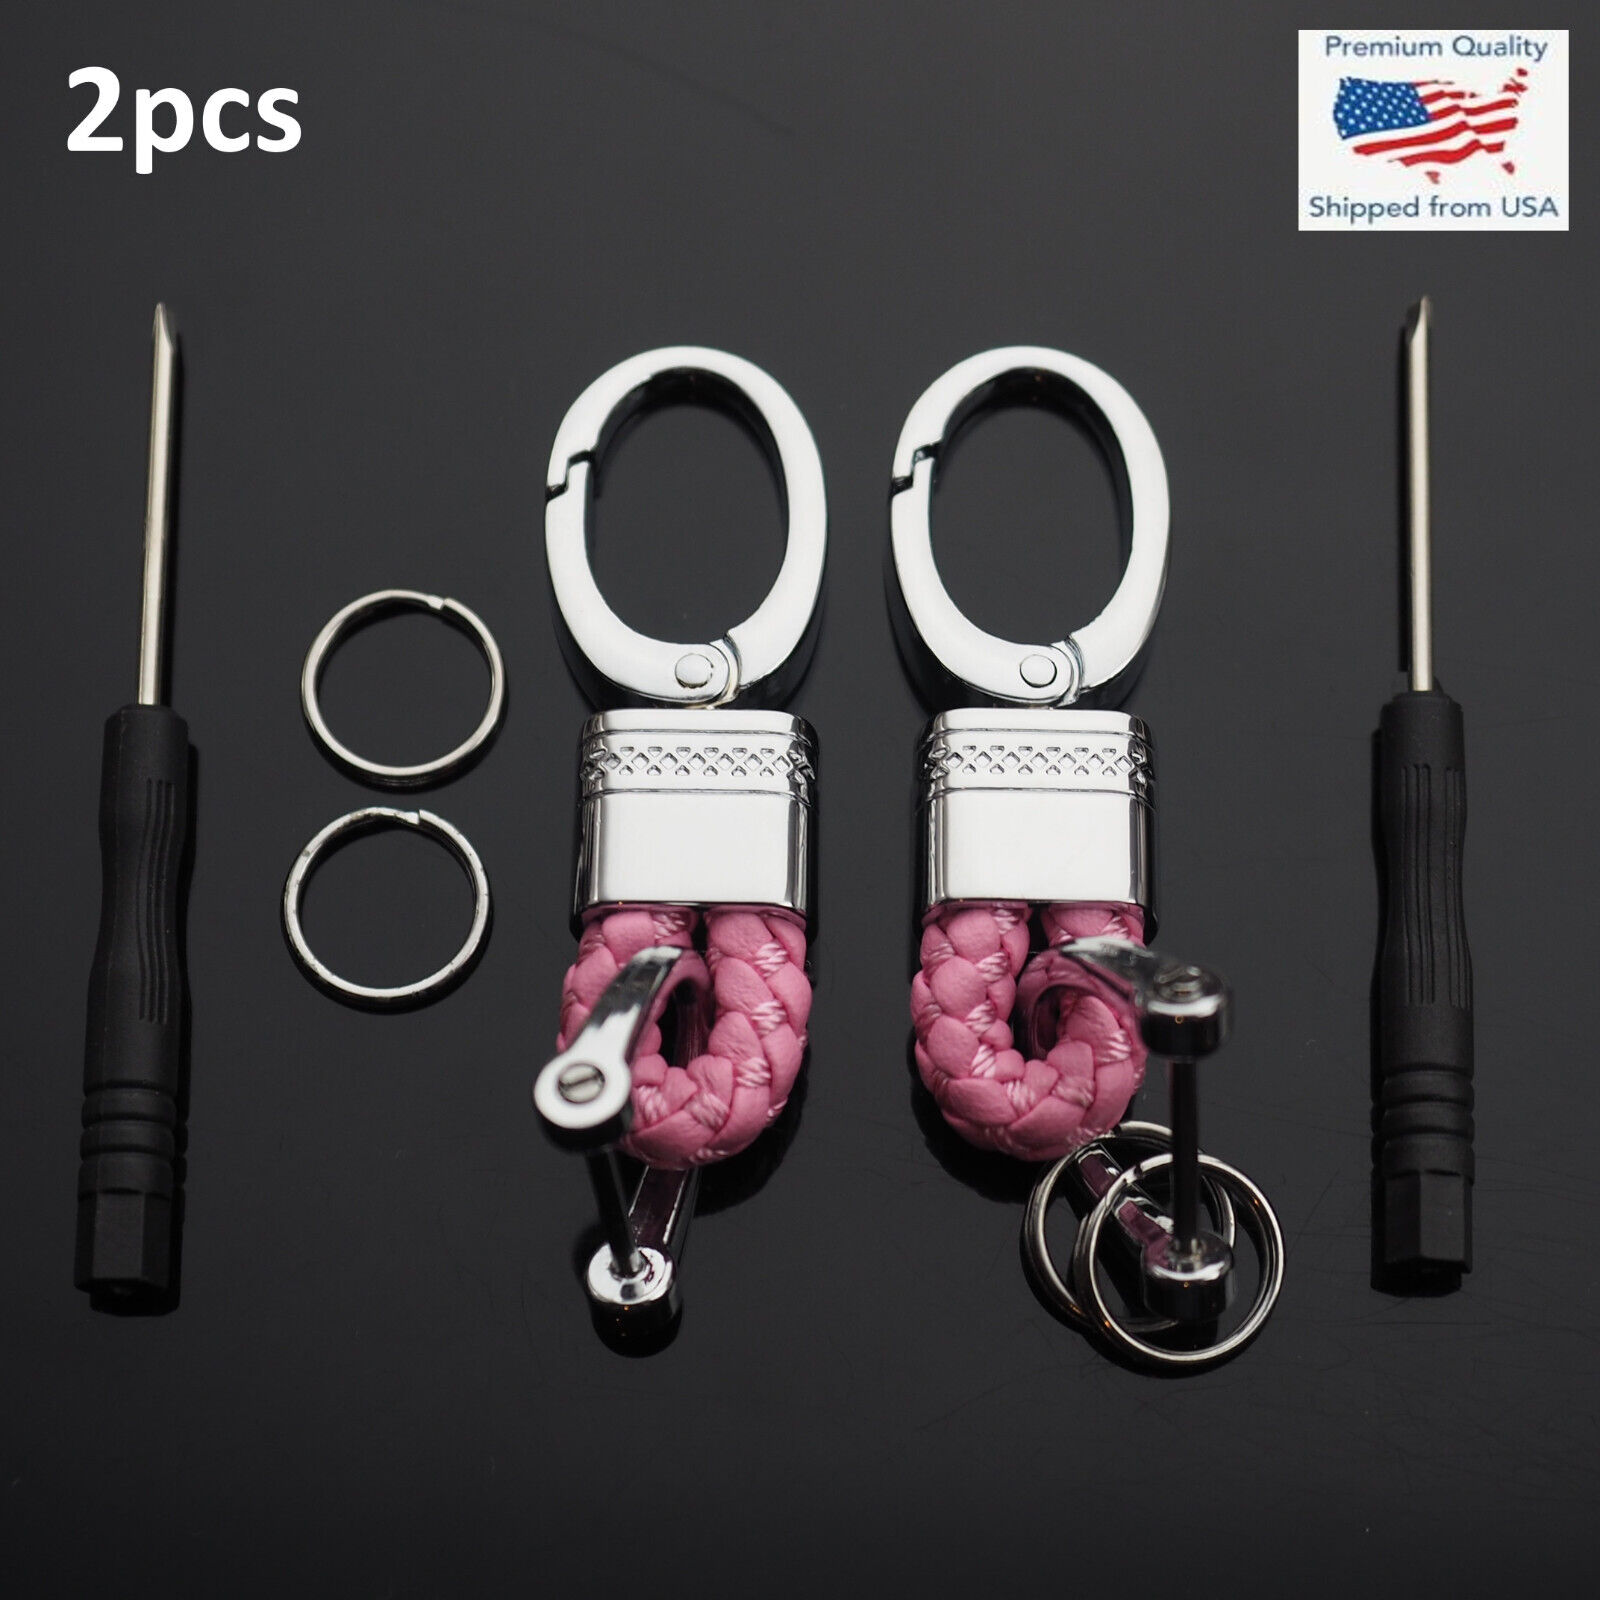 2pcs Pink & Silver Woven Leather Fob D-Ring Keychain Key Split Rings Holder Clip